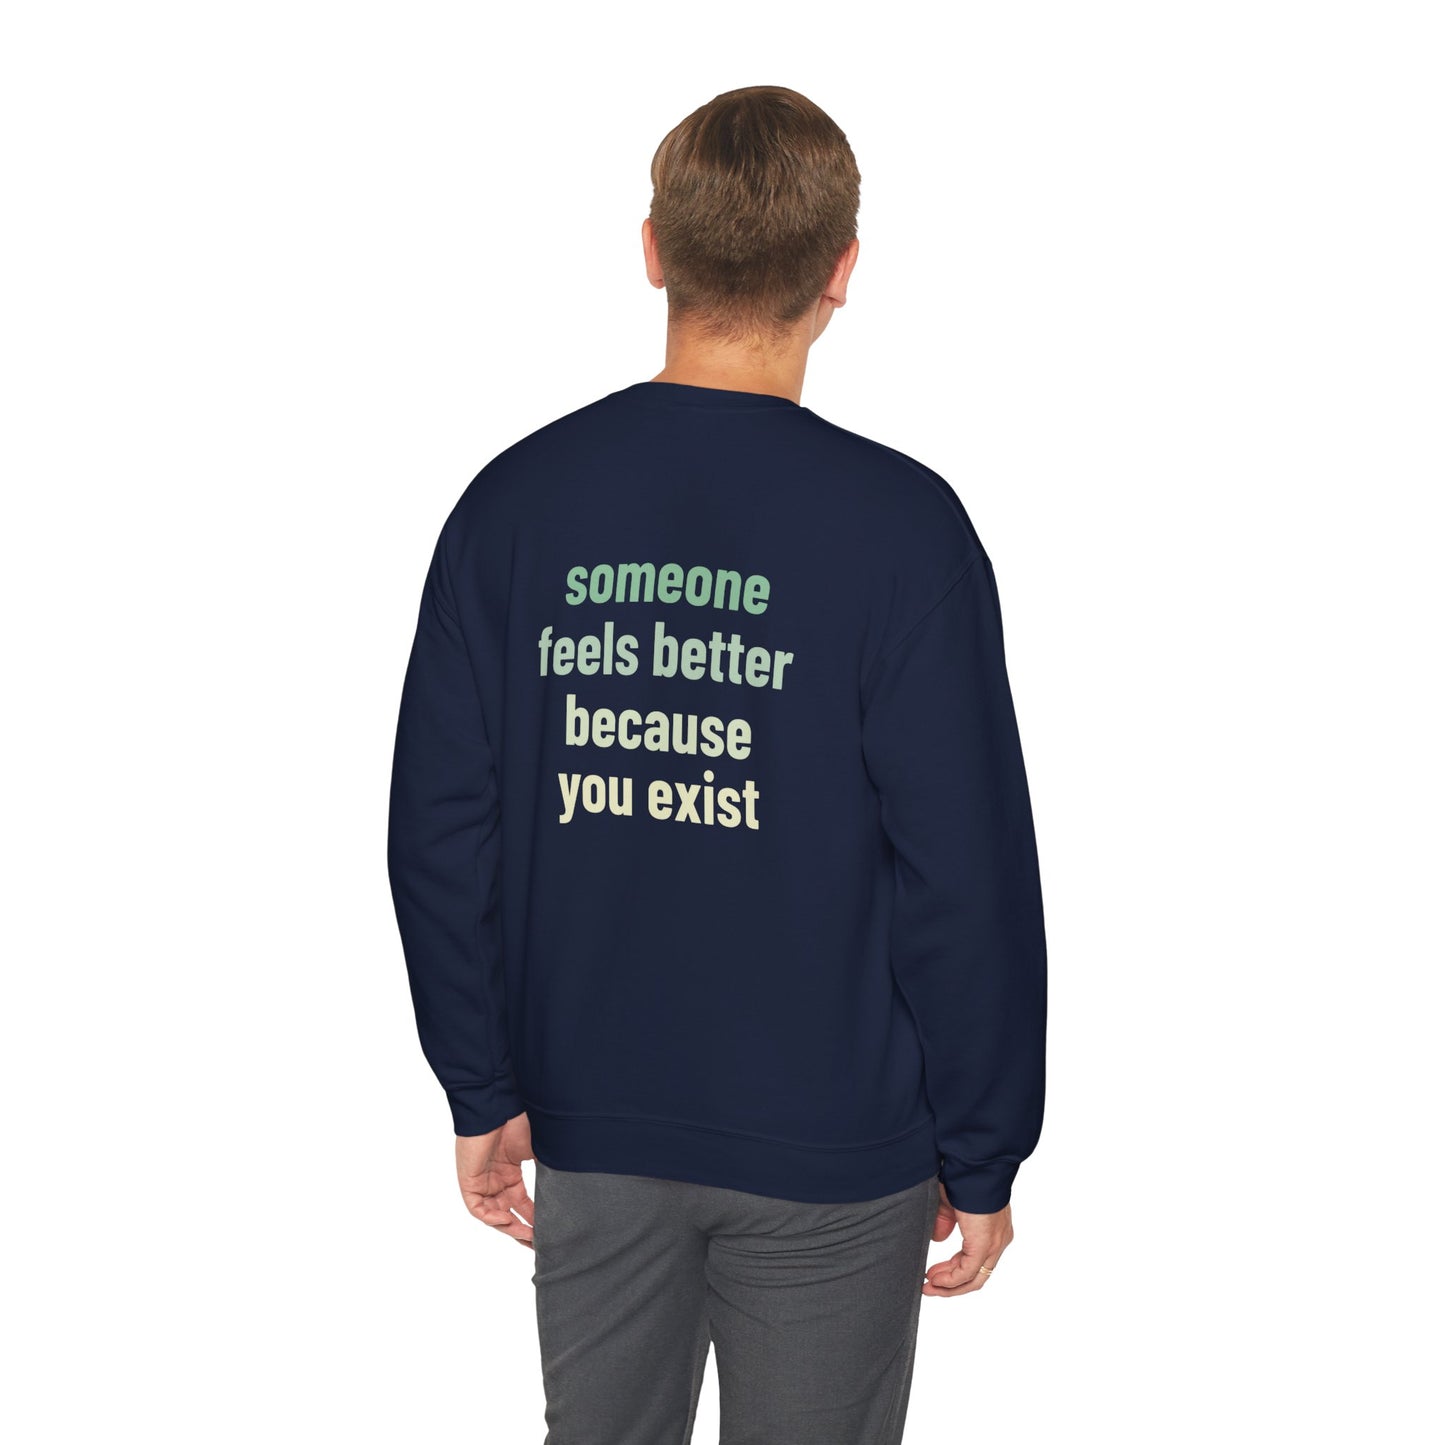 Someone feels better because you exist Crewneck Sweatshirt